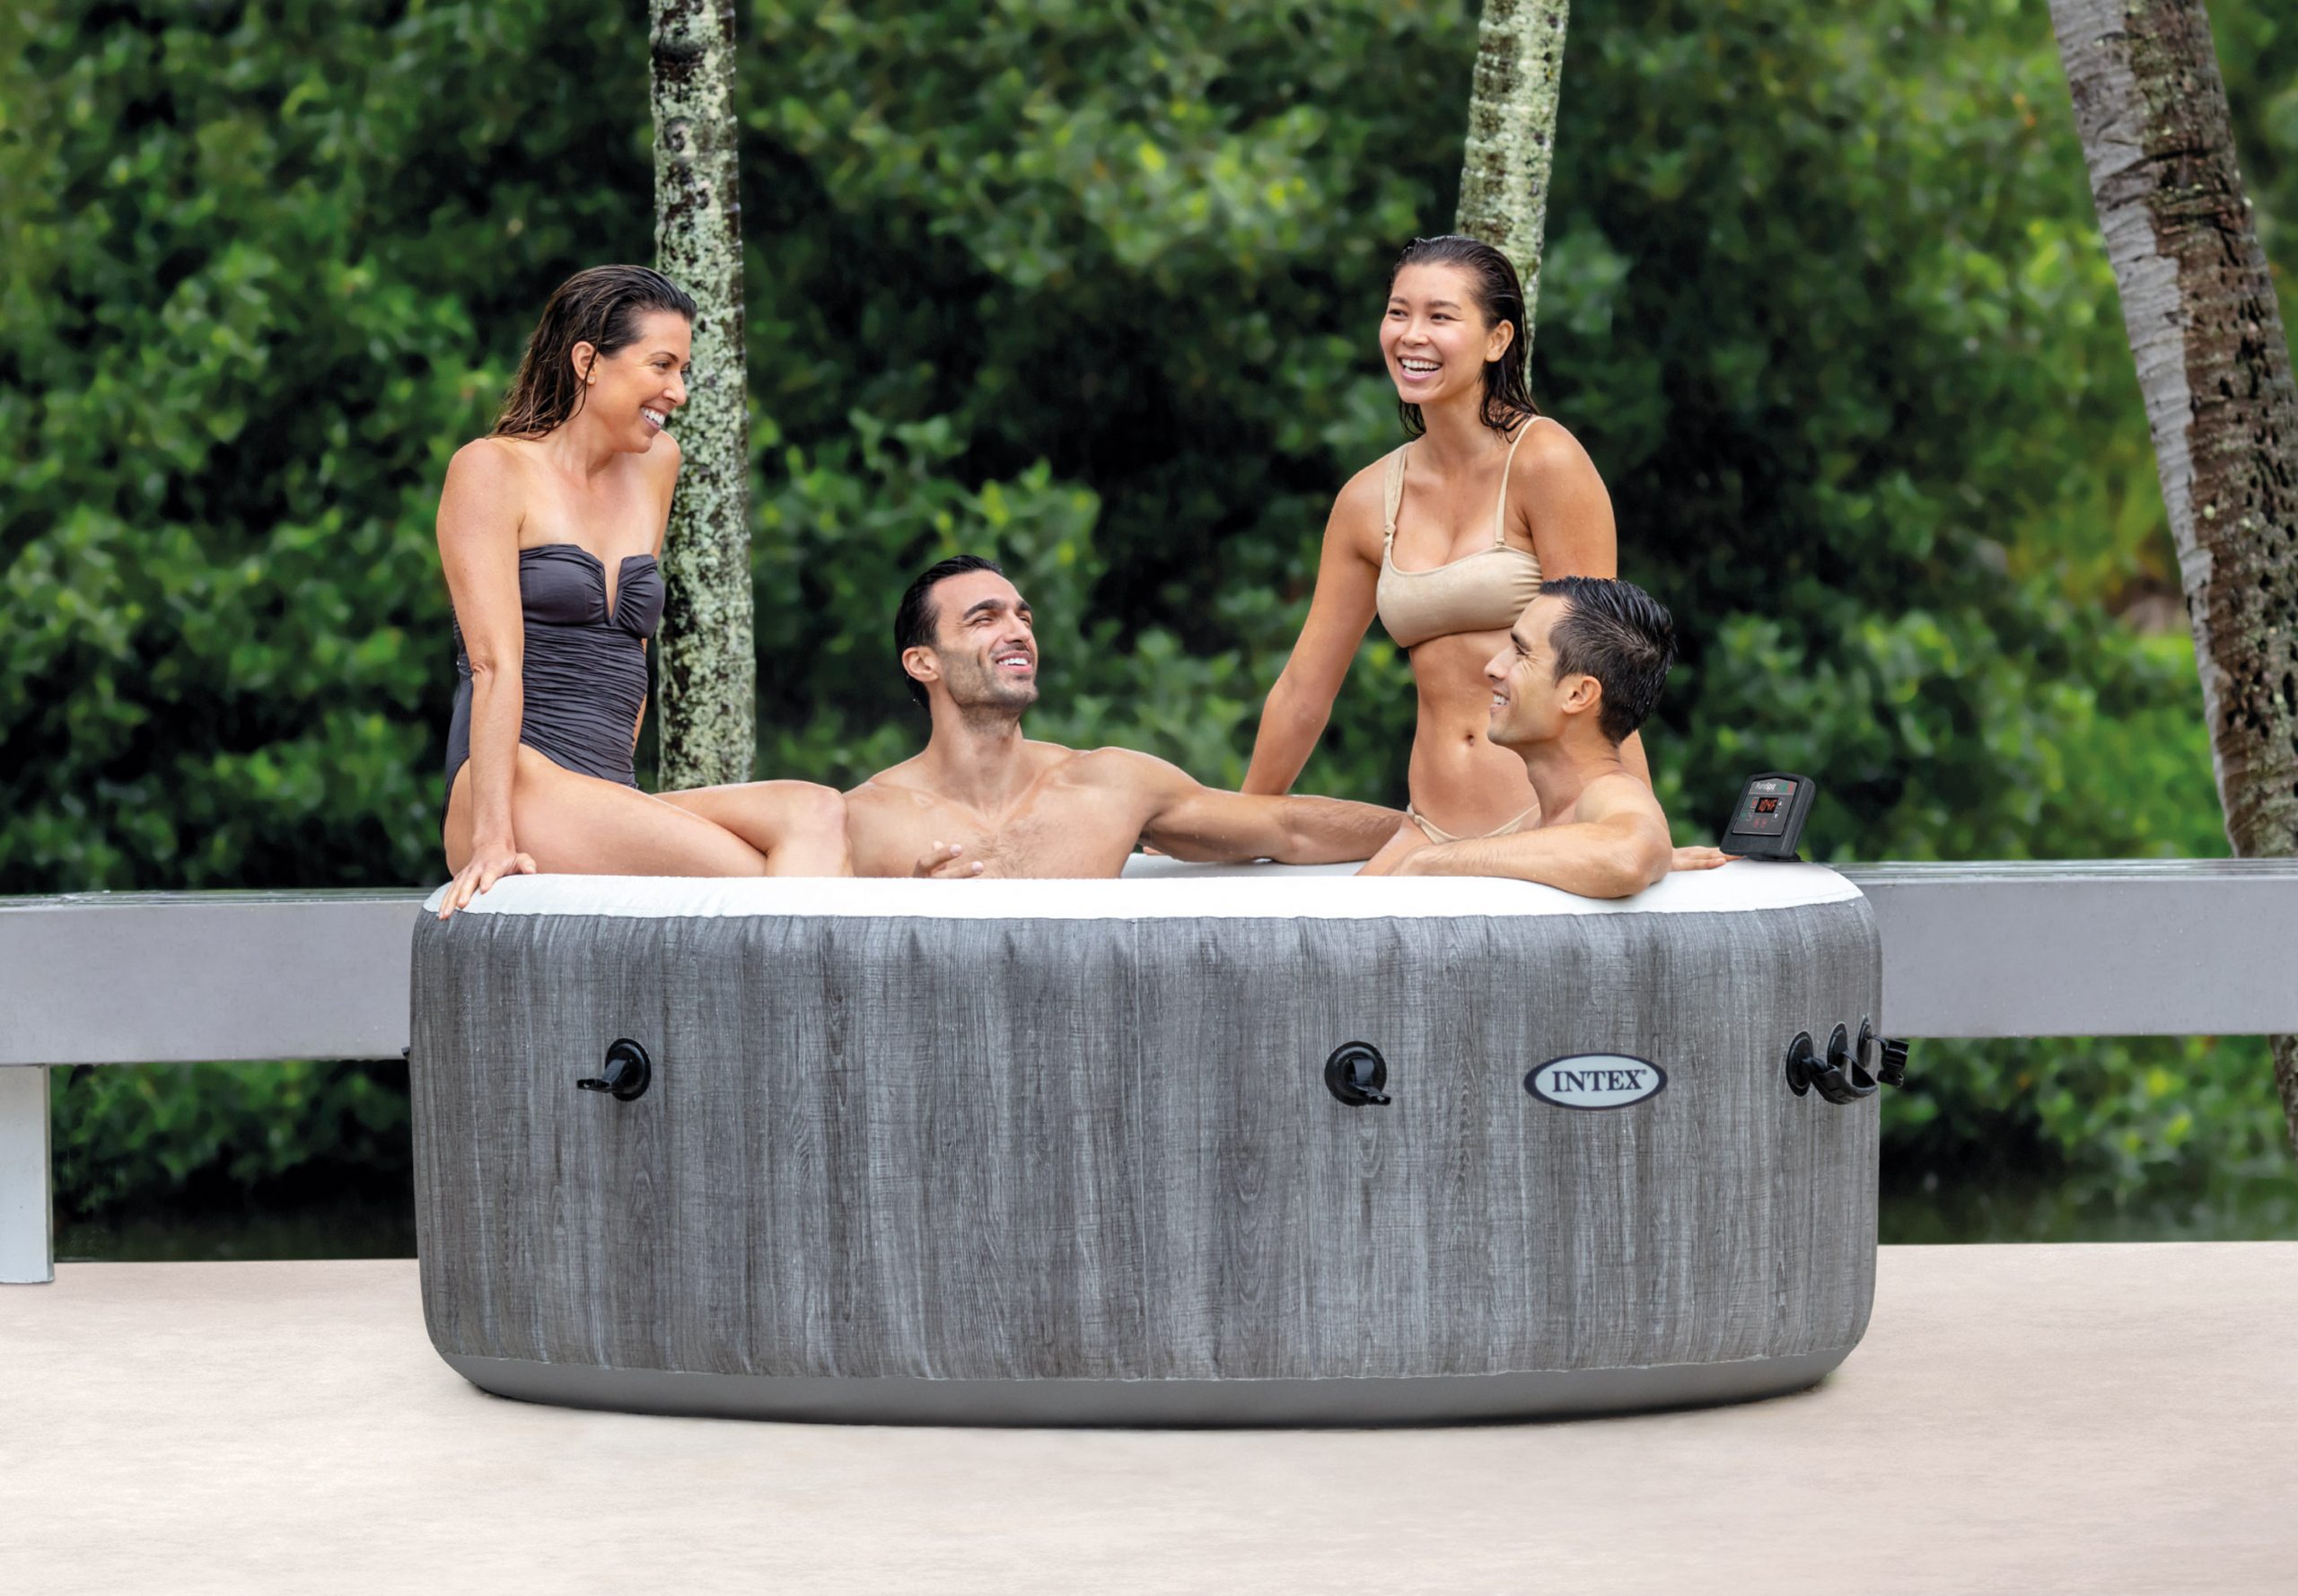 4 Person Round Greywood Bubble Spa - Wireless with WIFI Function | Intex  Wetset Pools & Accessories